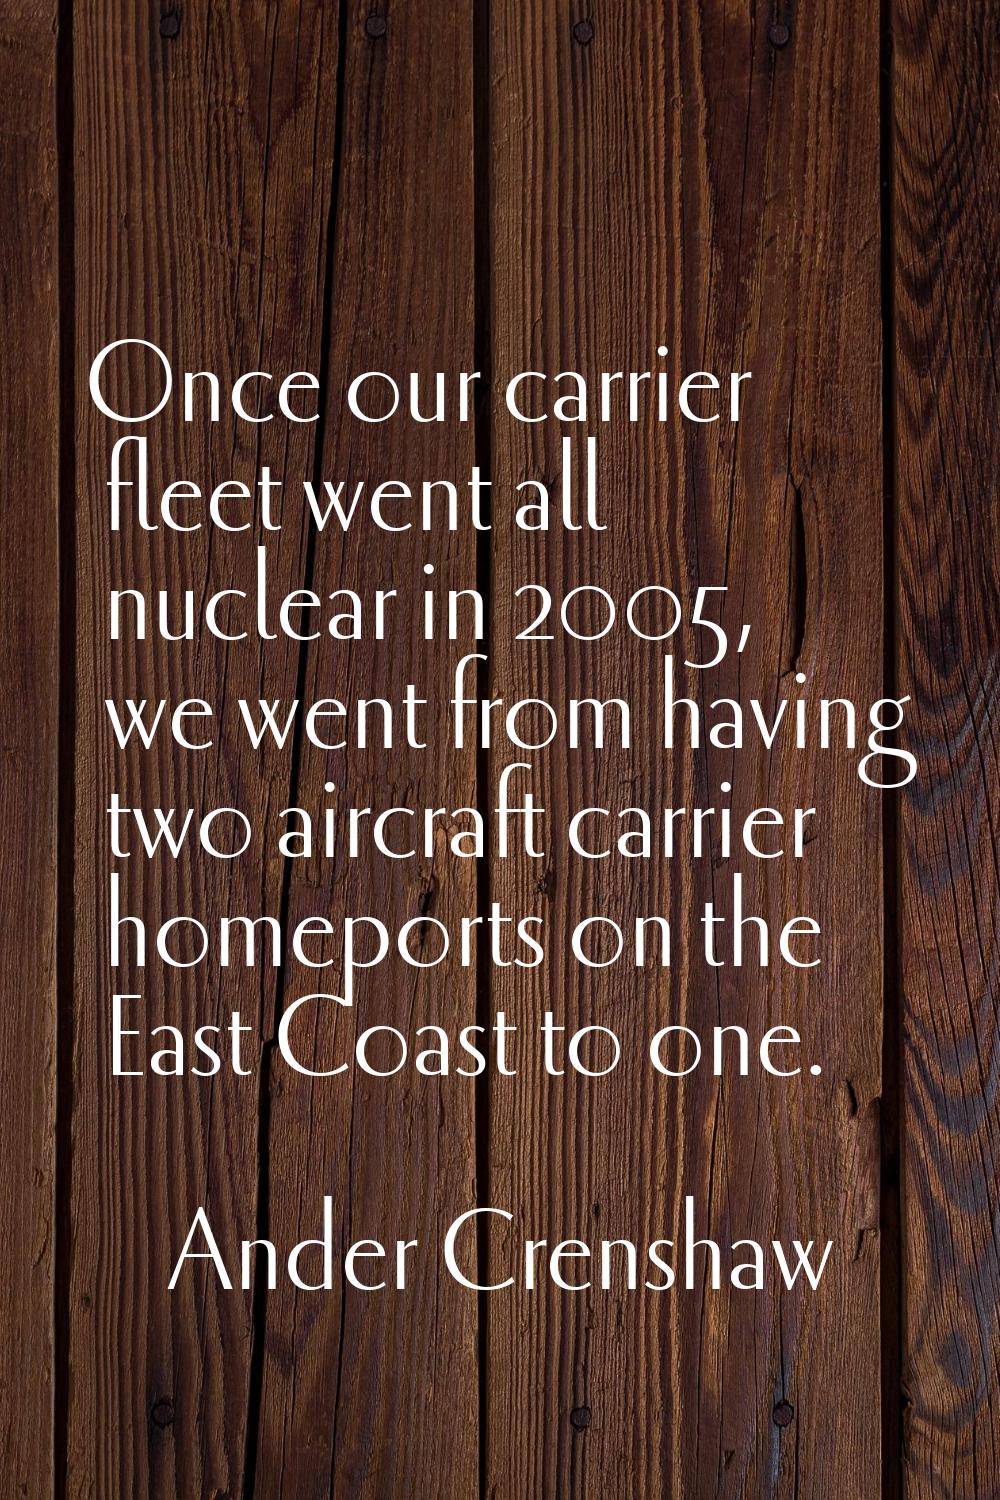 Once our carrier fleet went all nuclear in 2005, we went from having two aircraft carrier homeports